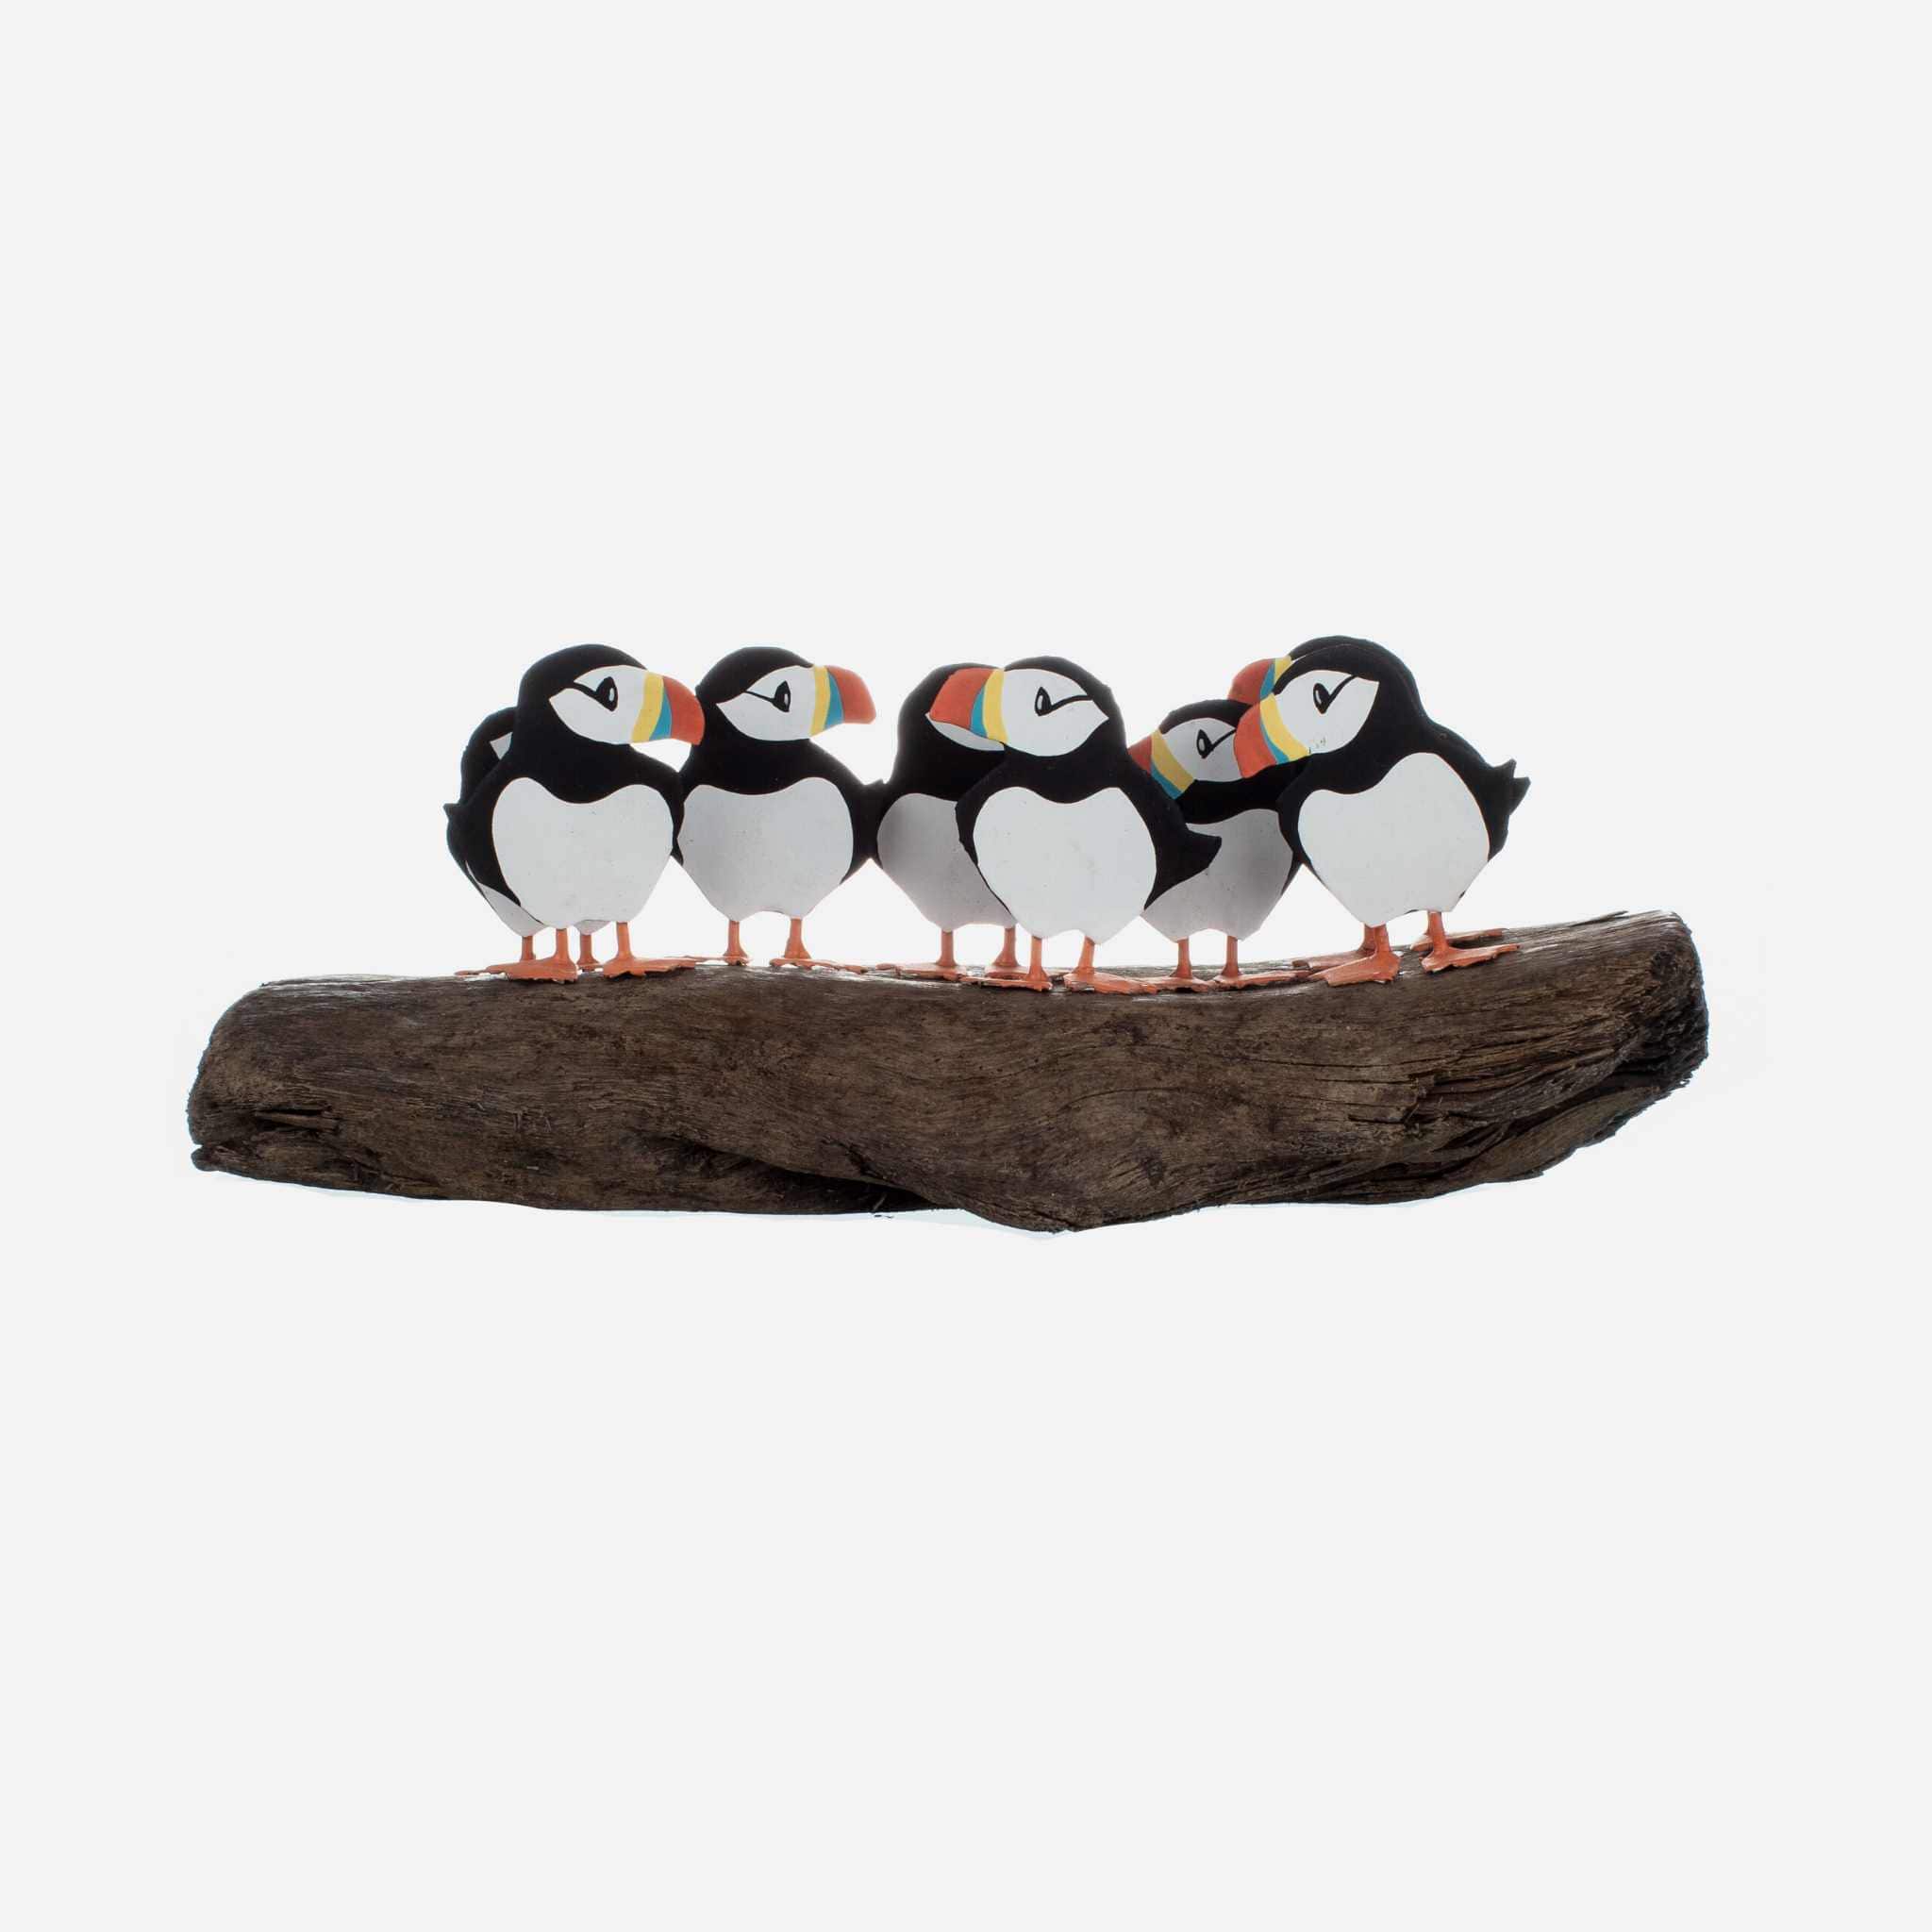 Circus of Puffins Decoration